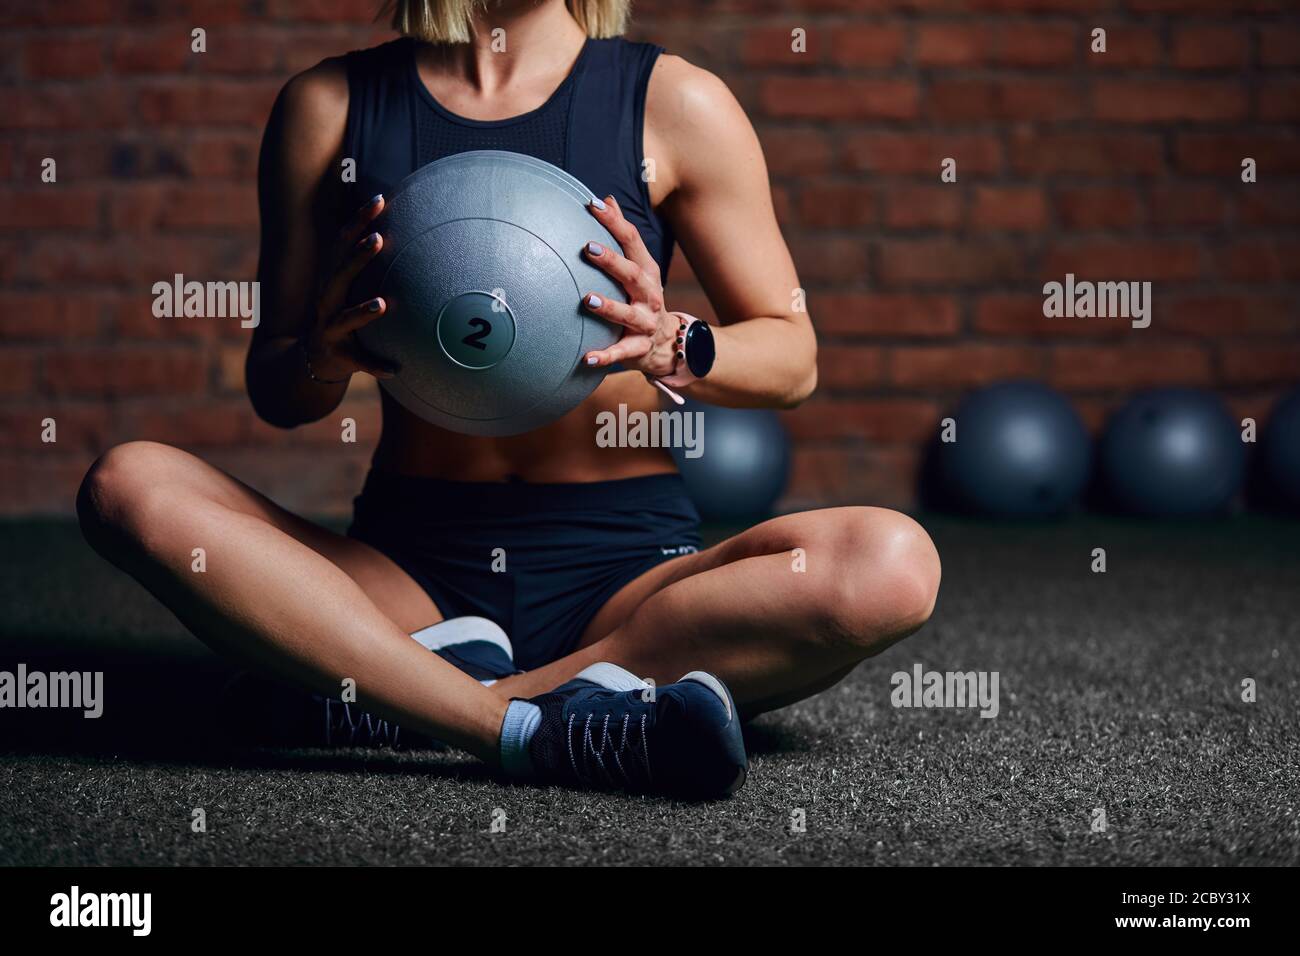 Fit well-trained woman in black sports wear posing with medicine ball during pilates workout in fitness centre. Stock Photo